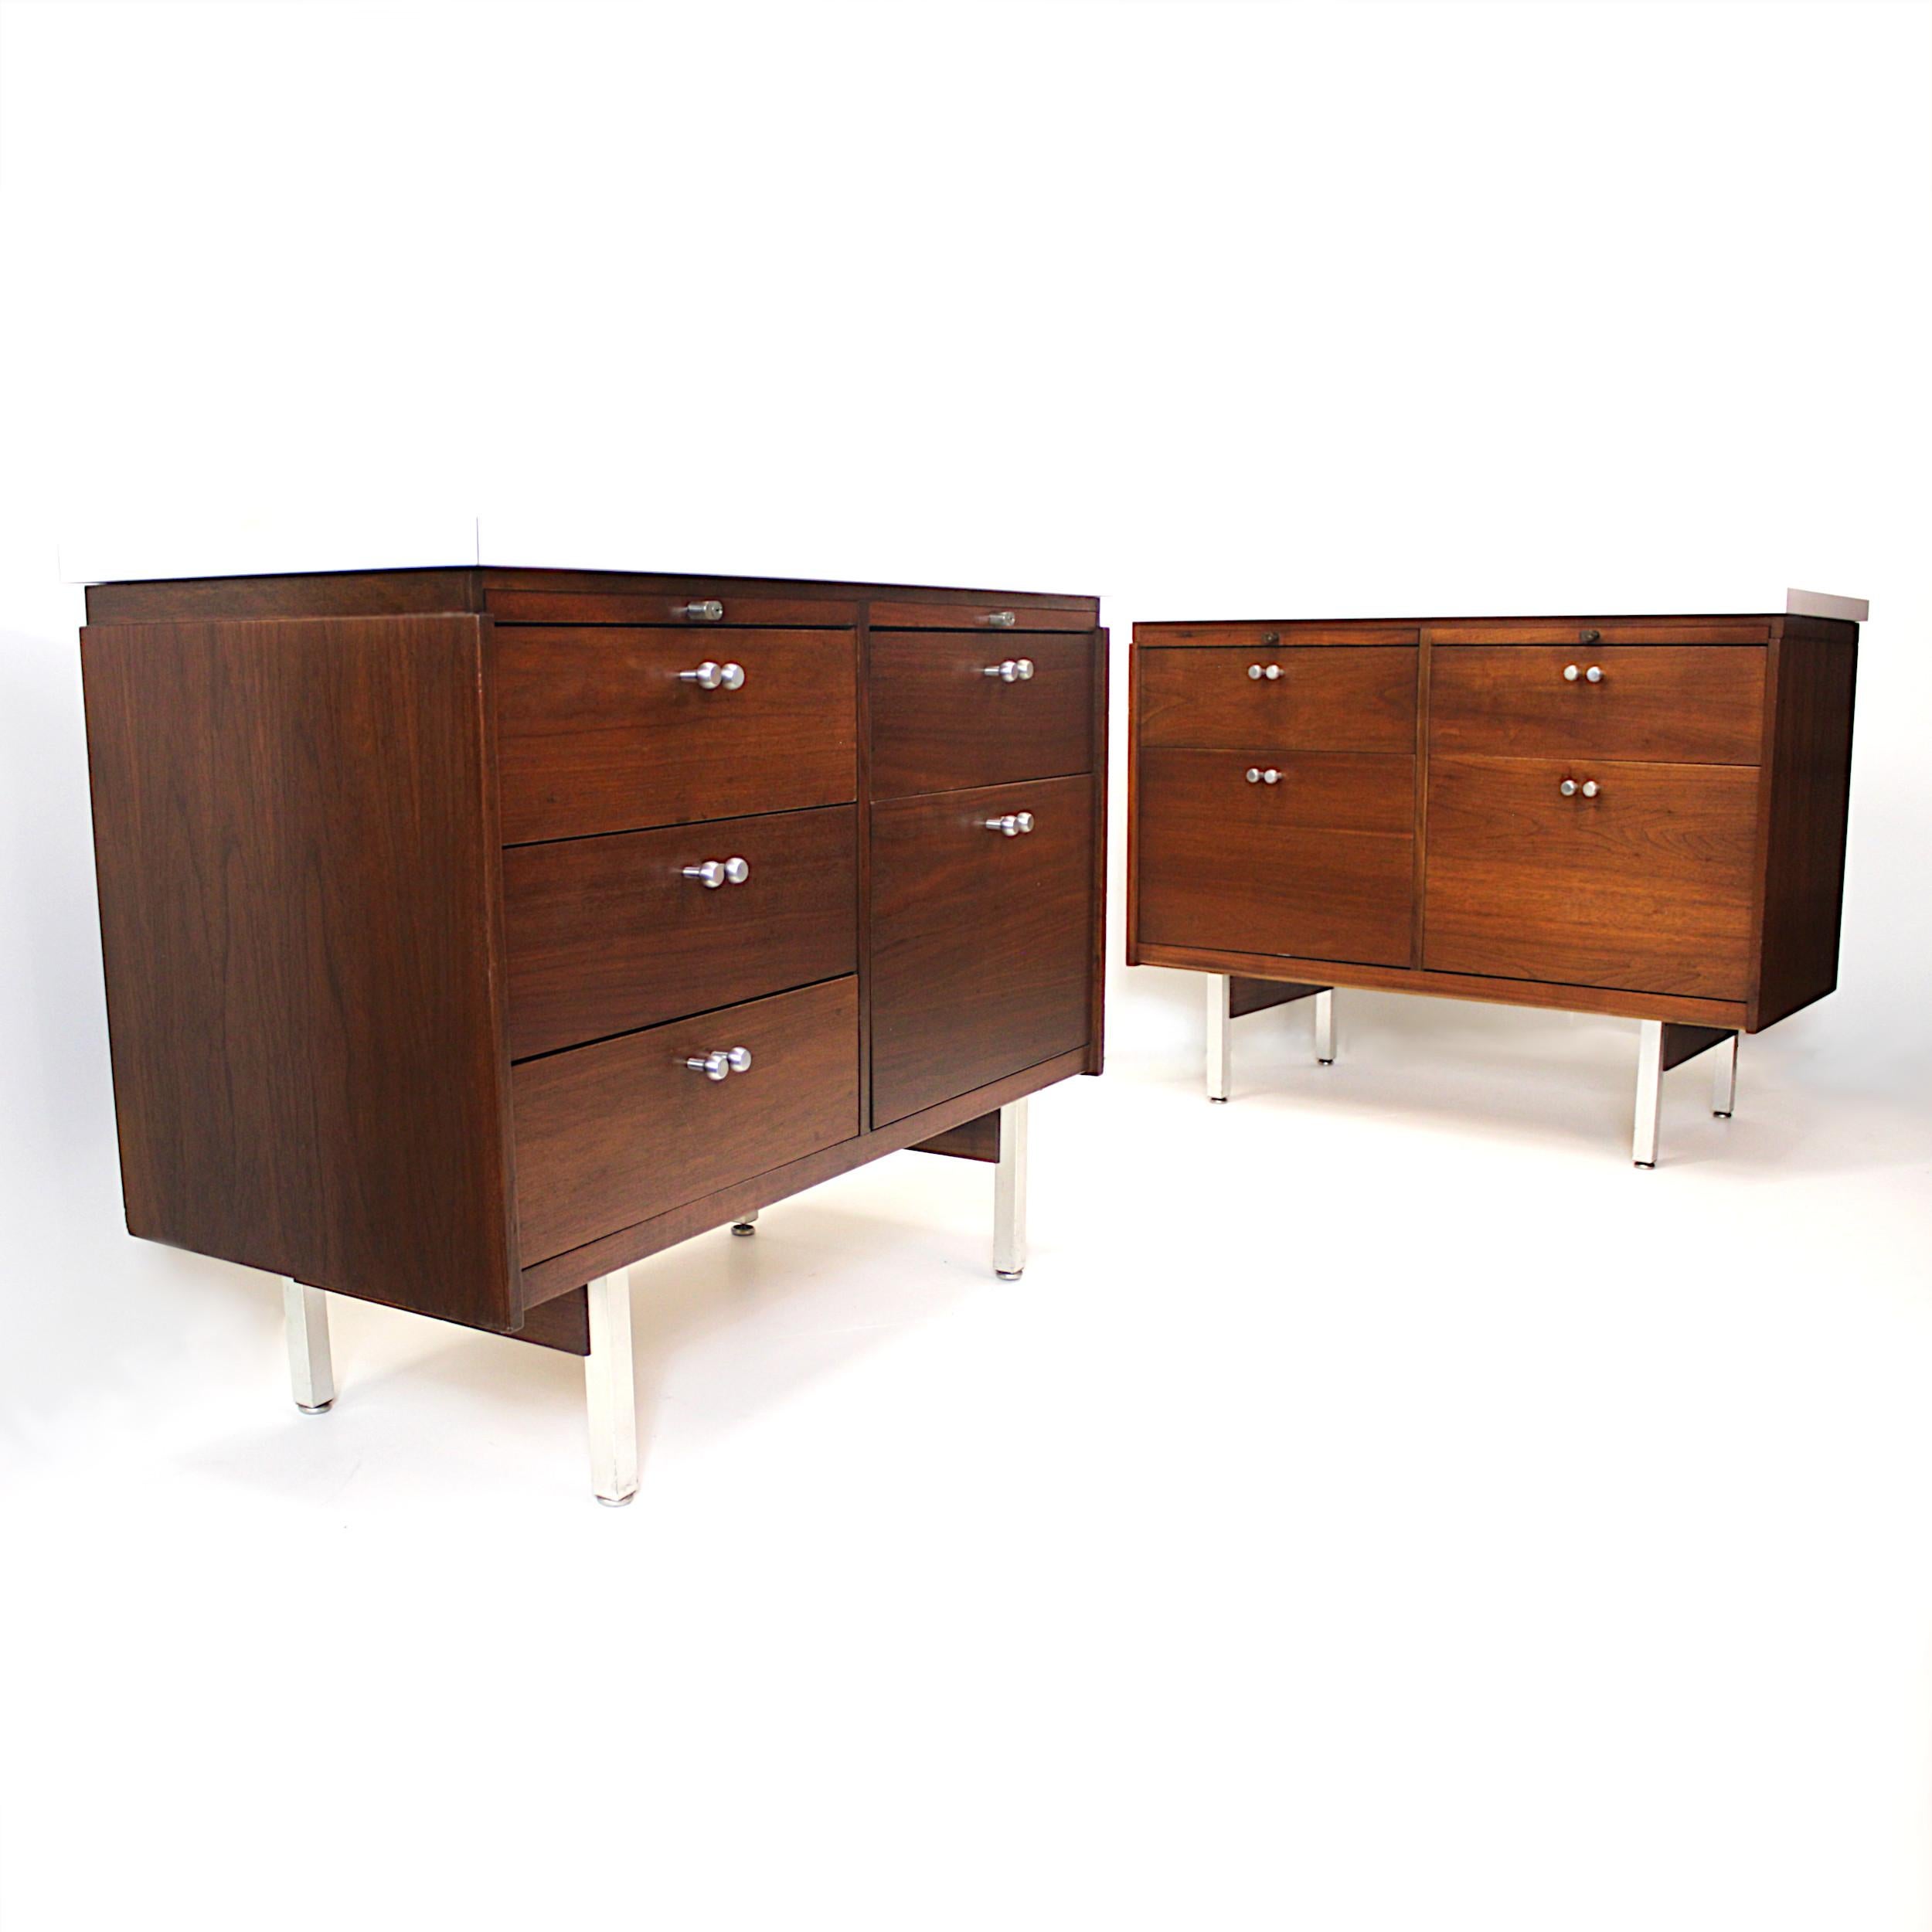 This matching pair of credenzas/consoles are part of the Template Group series of furniture designed by architect/designer Charles Deaton for the Leopold furniture Company. Deaton is best known for designing the iconic 'Sculpture House' located on